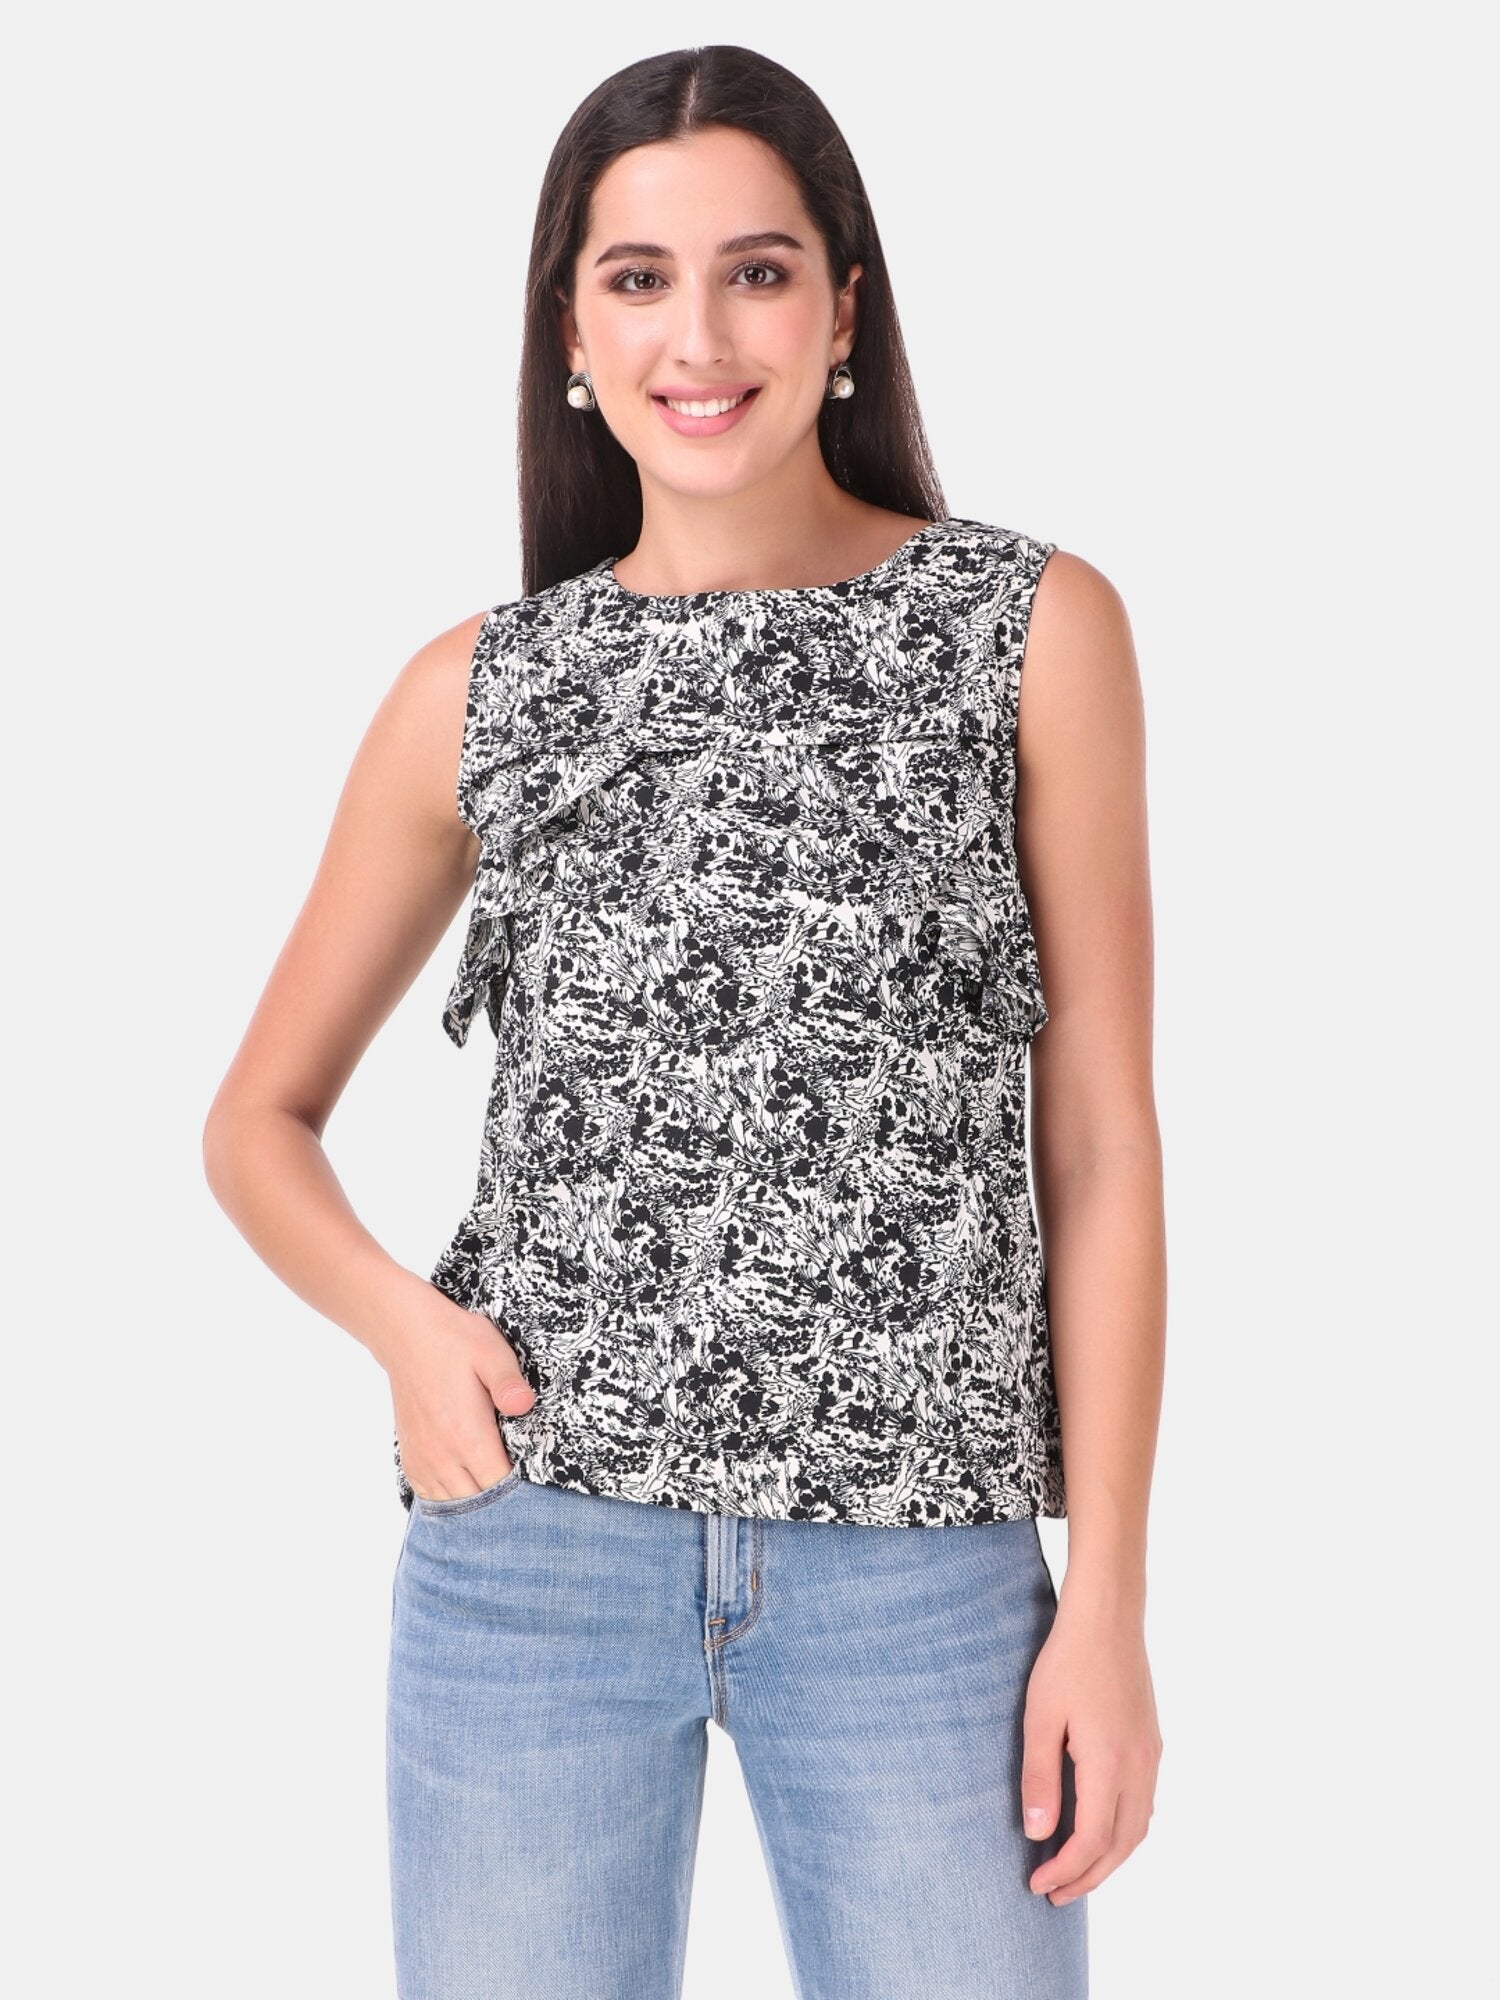 Women's Black Abstract Printed Summer Only Top - MESMORA FASHION